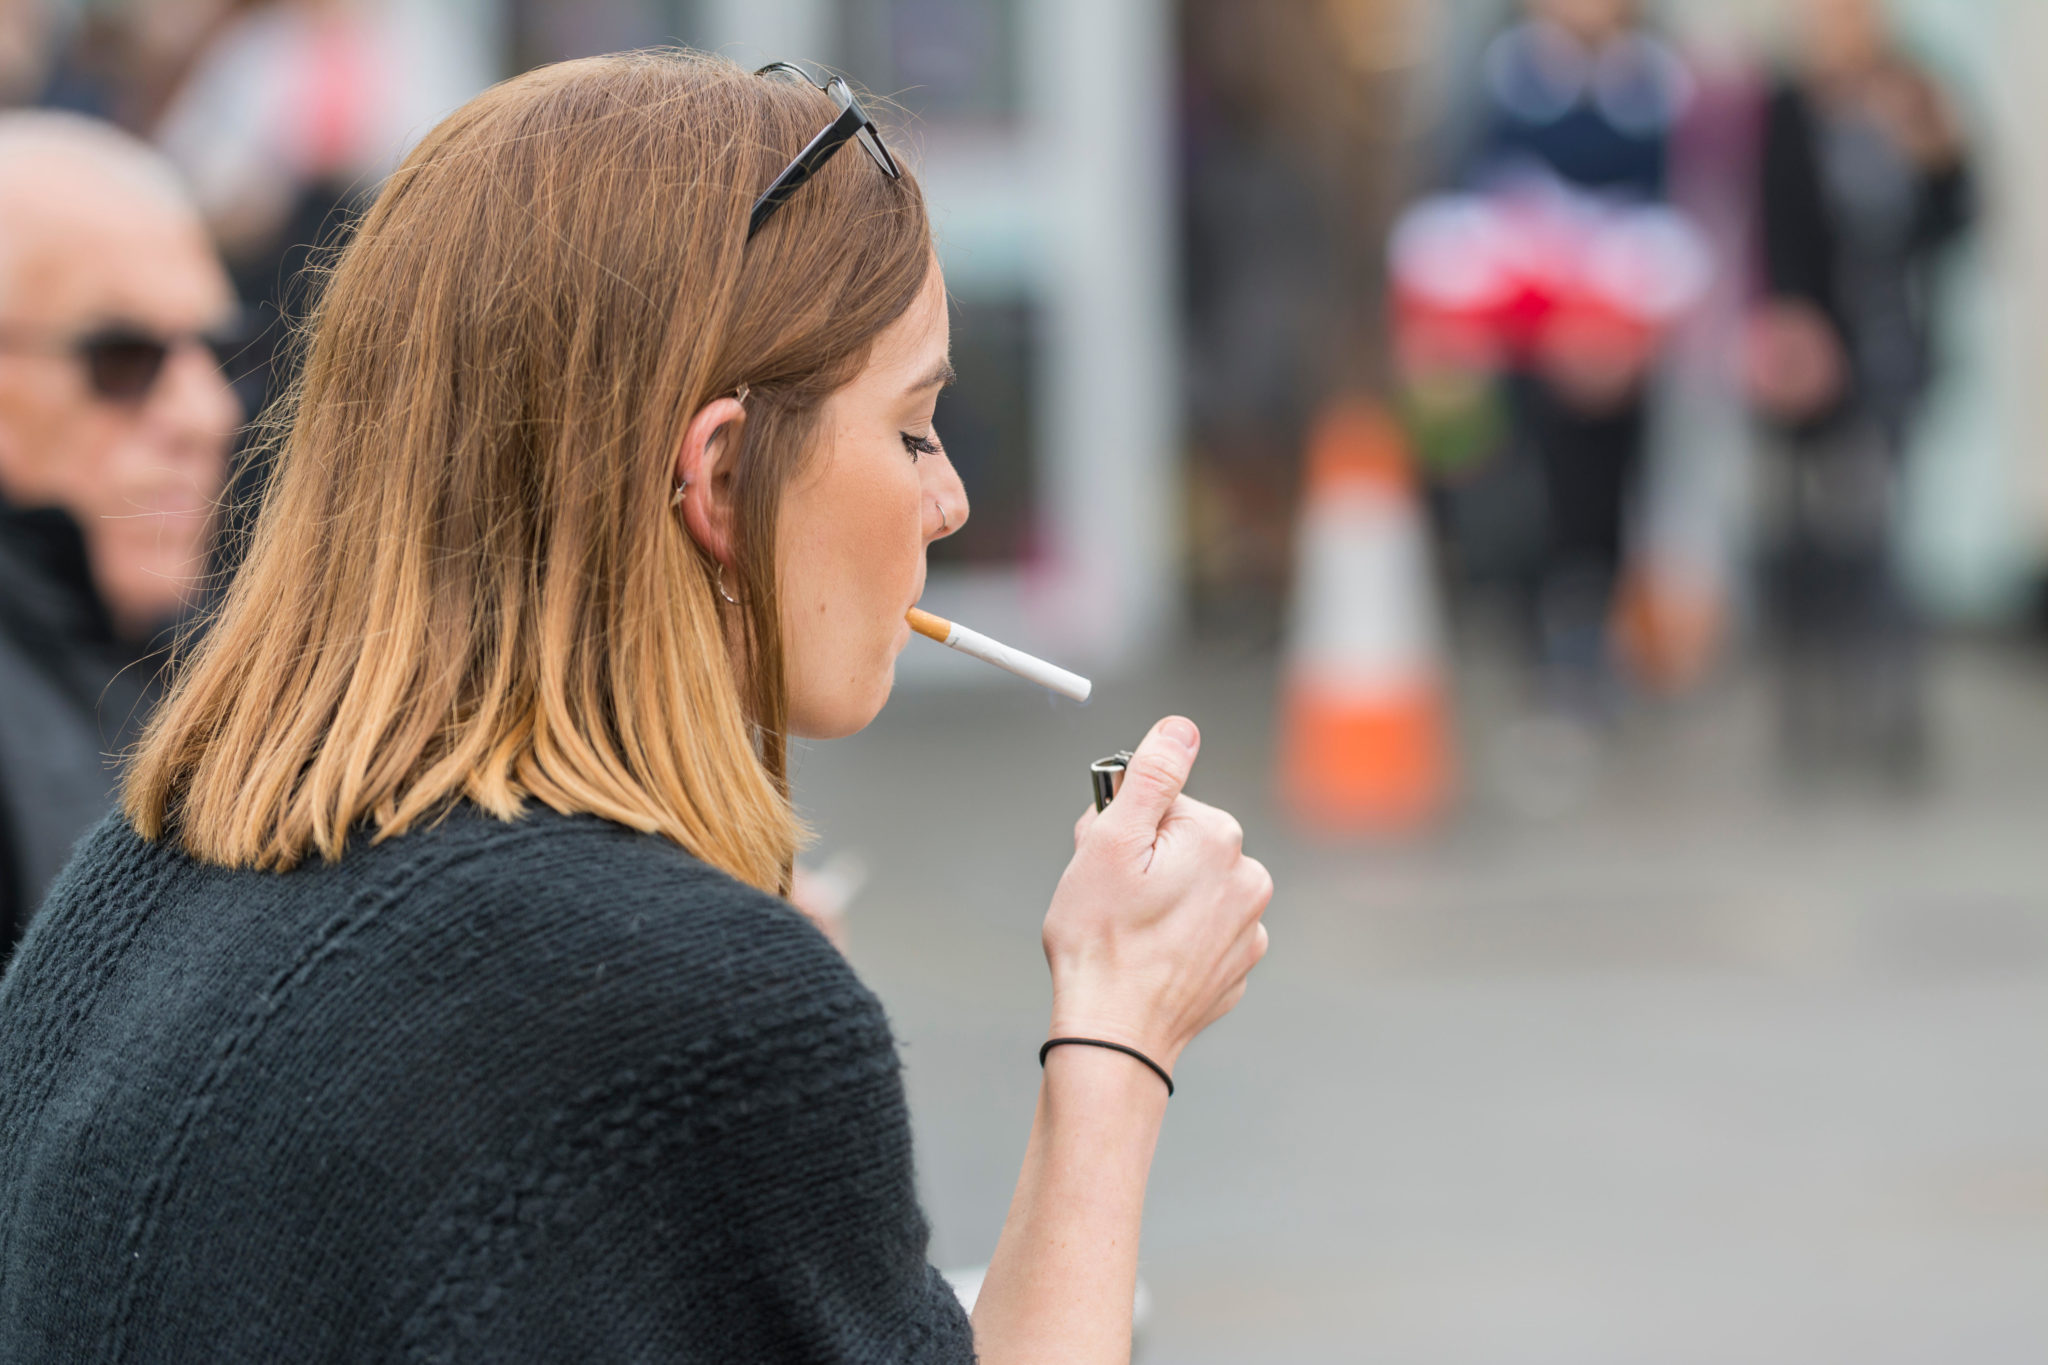 A woman lighting a cigarette in October 2017.